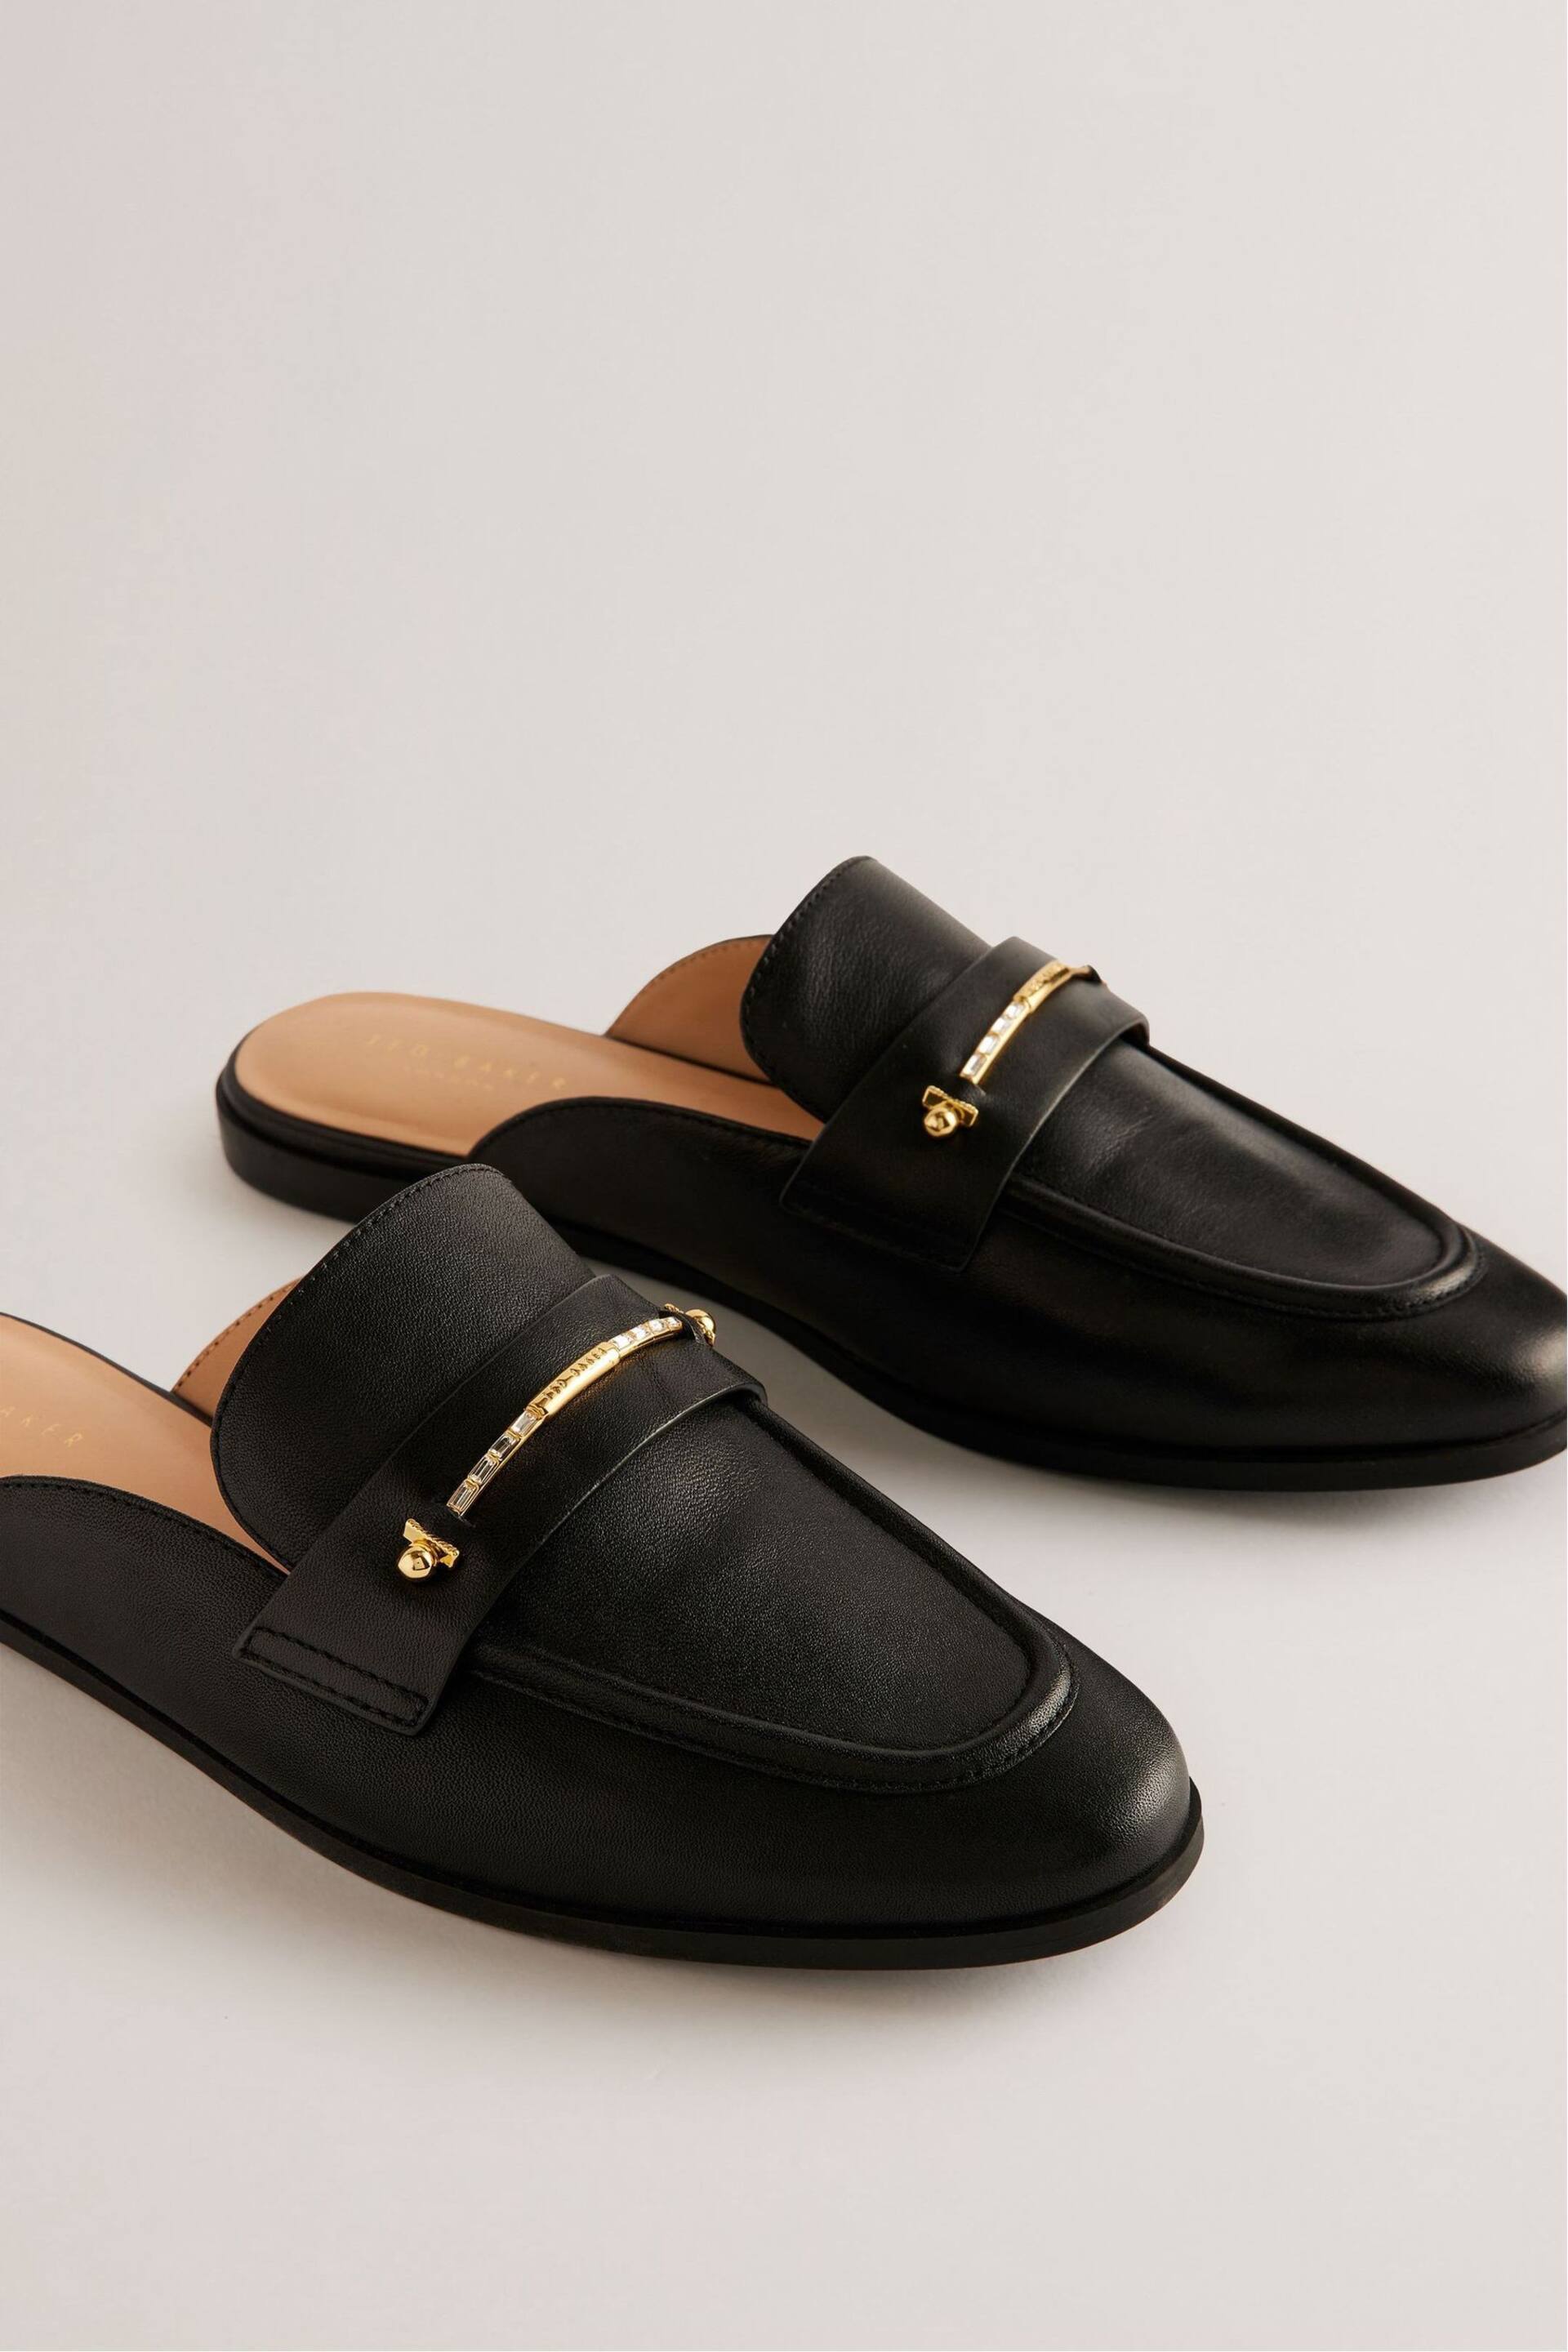 Ted Baker Black Flat Zola Mule Loafers With Signature Bar - Image 3 of 5